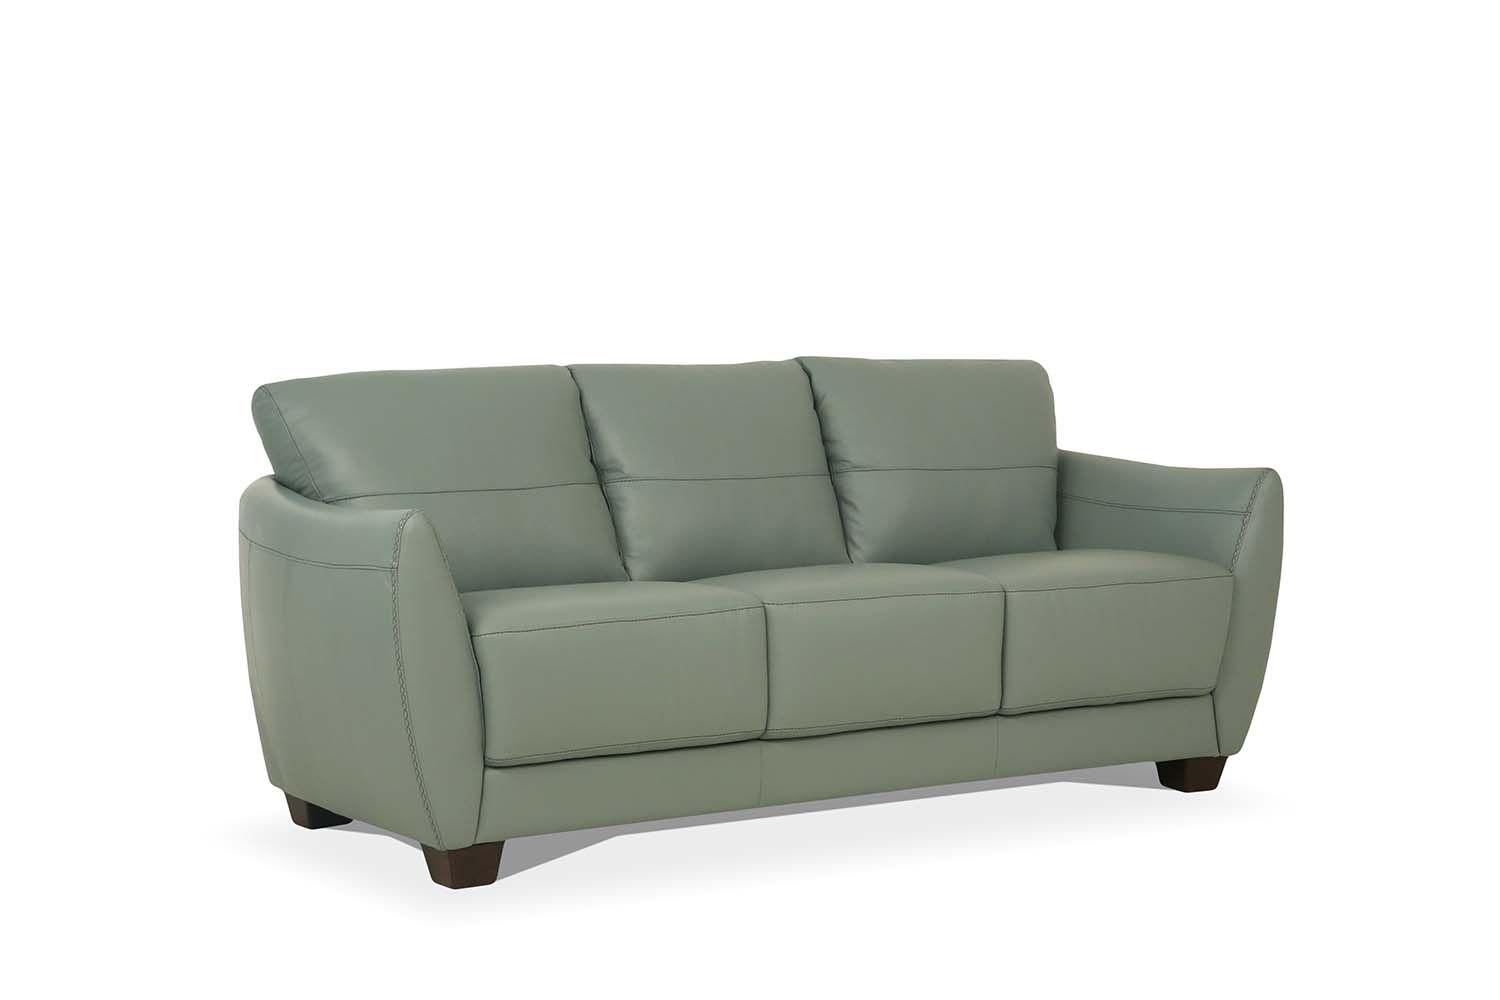 Modern, Transitional Sofa Valeria 54950 in Spring green Leather